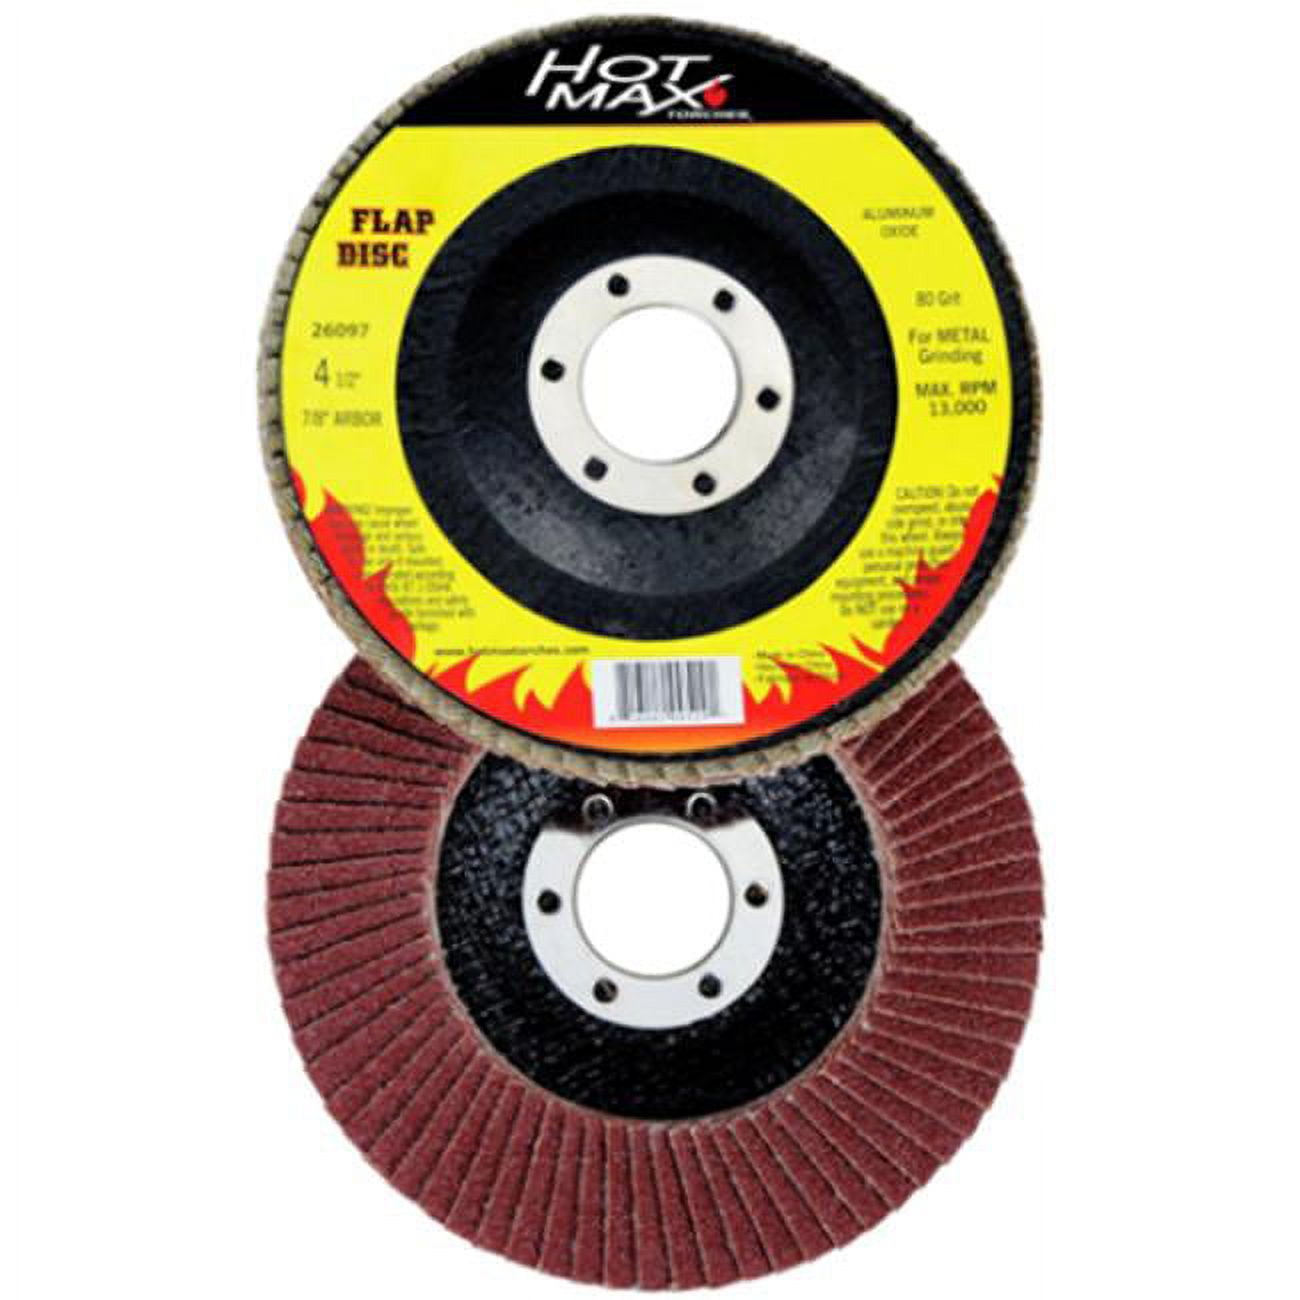 26097 4.5 In. 80 Grit Type 27 Flap Disc